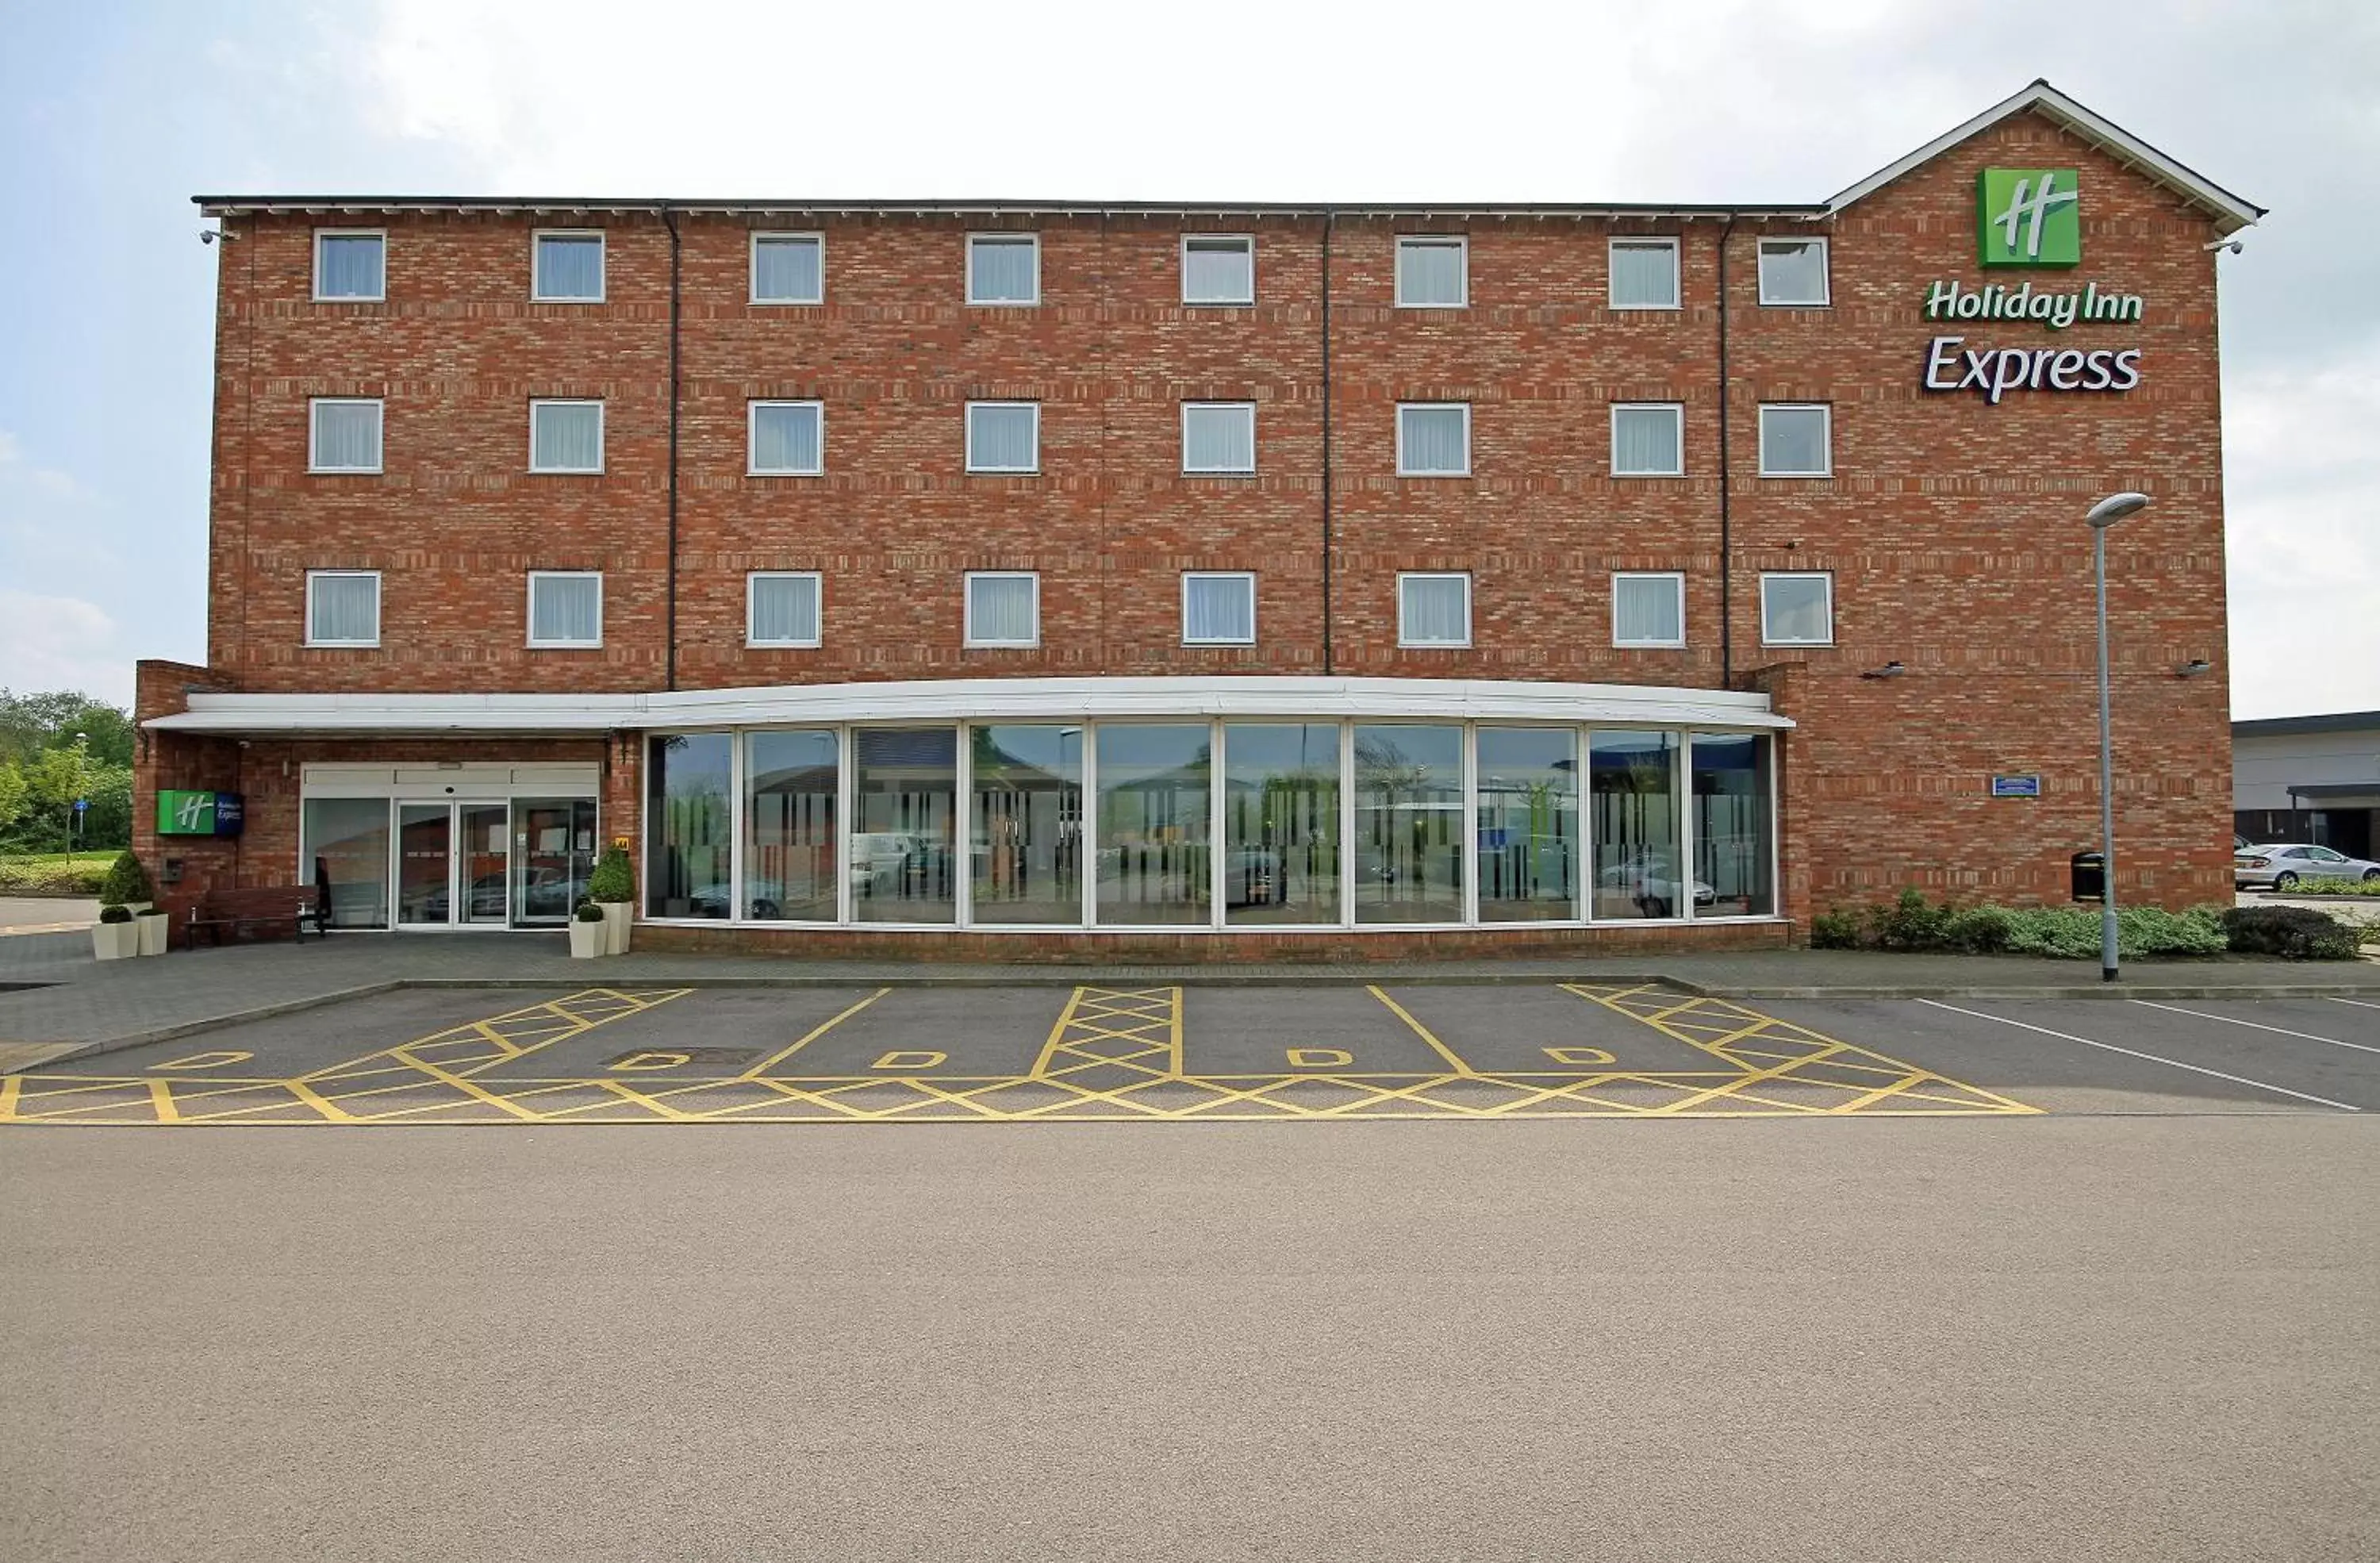 Property Building in Holiday Inn Express Nuneaton, an IHG Hotel